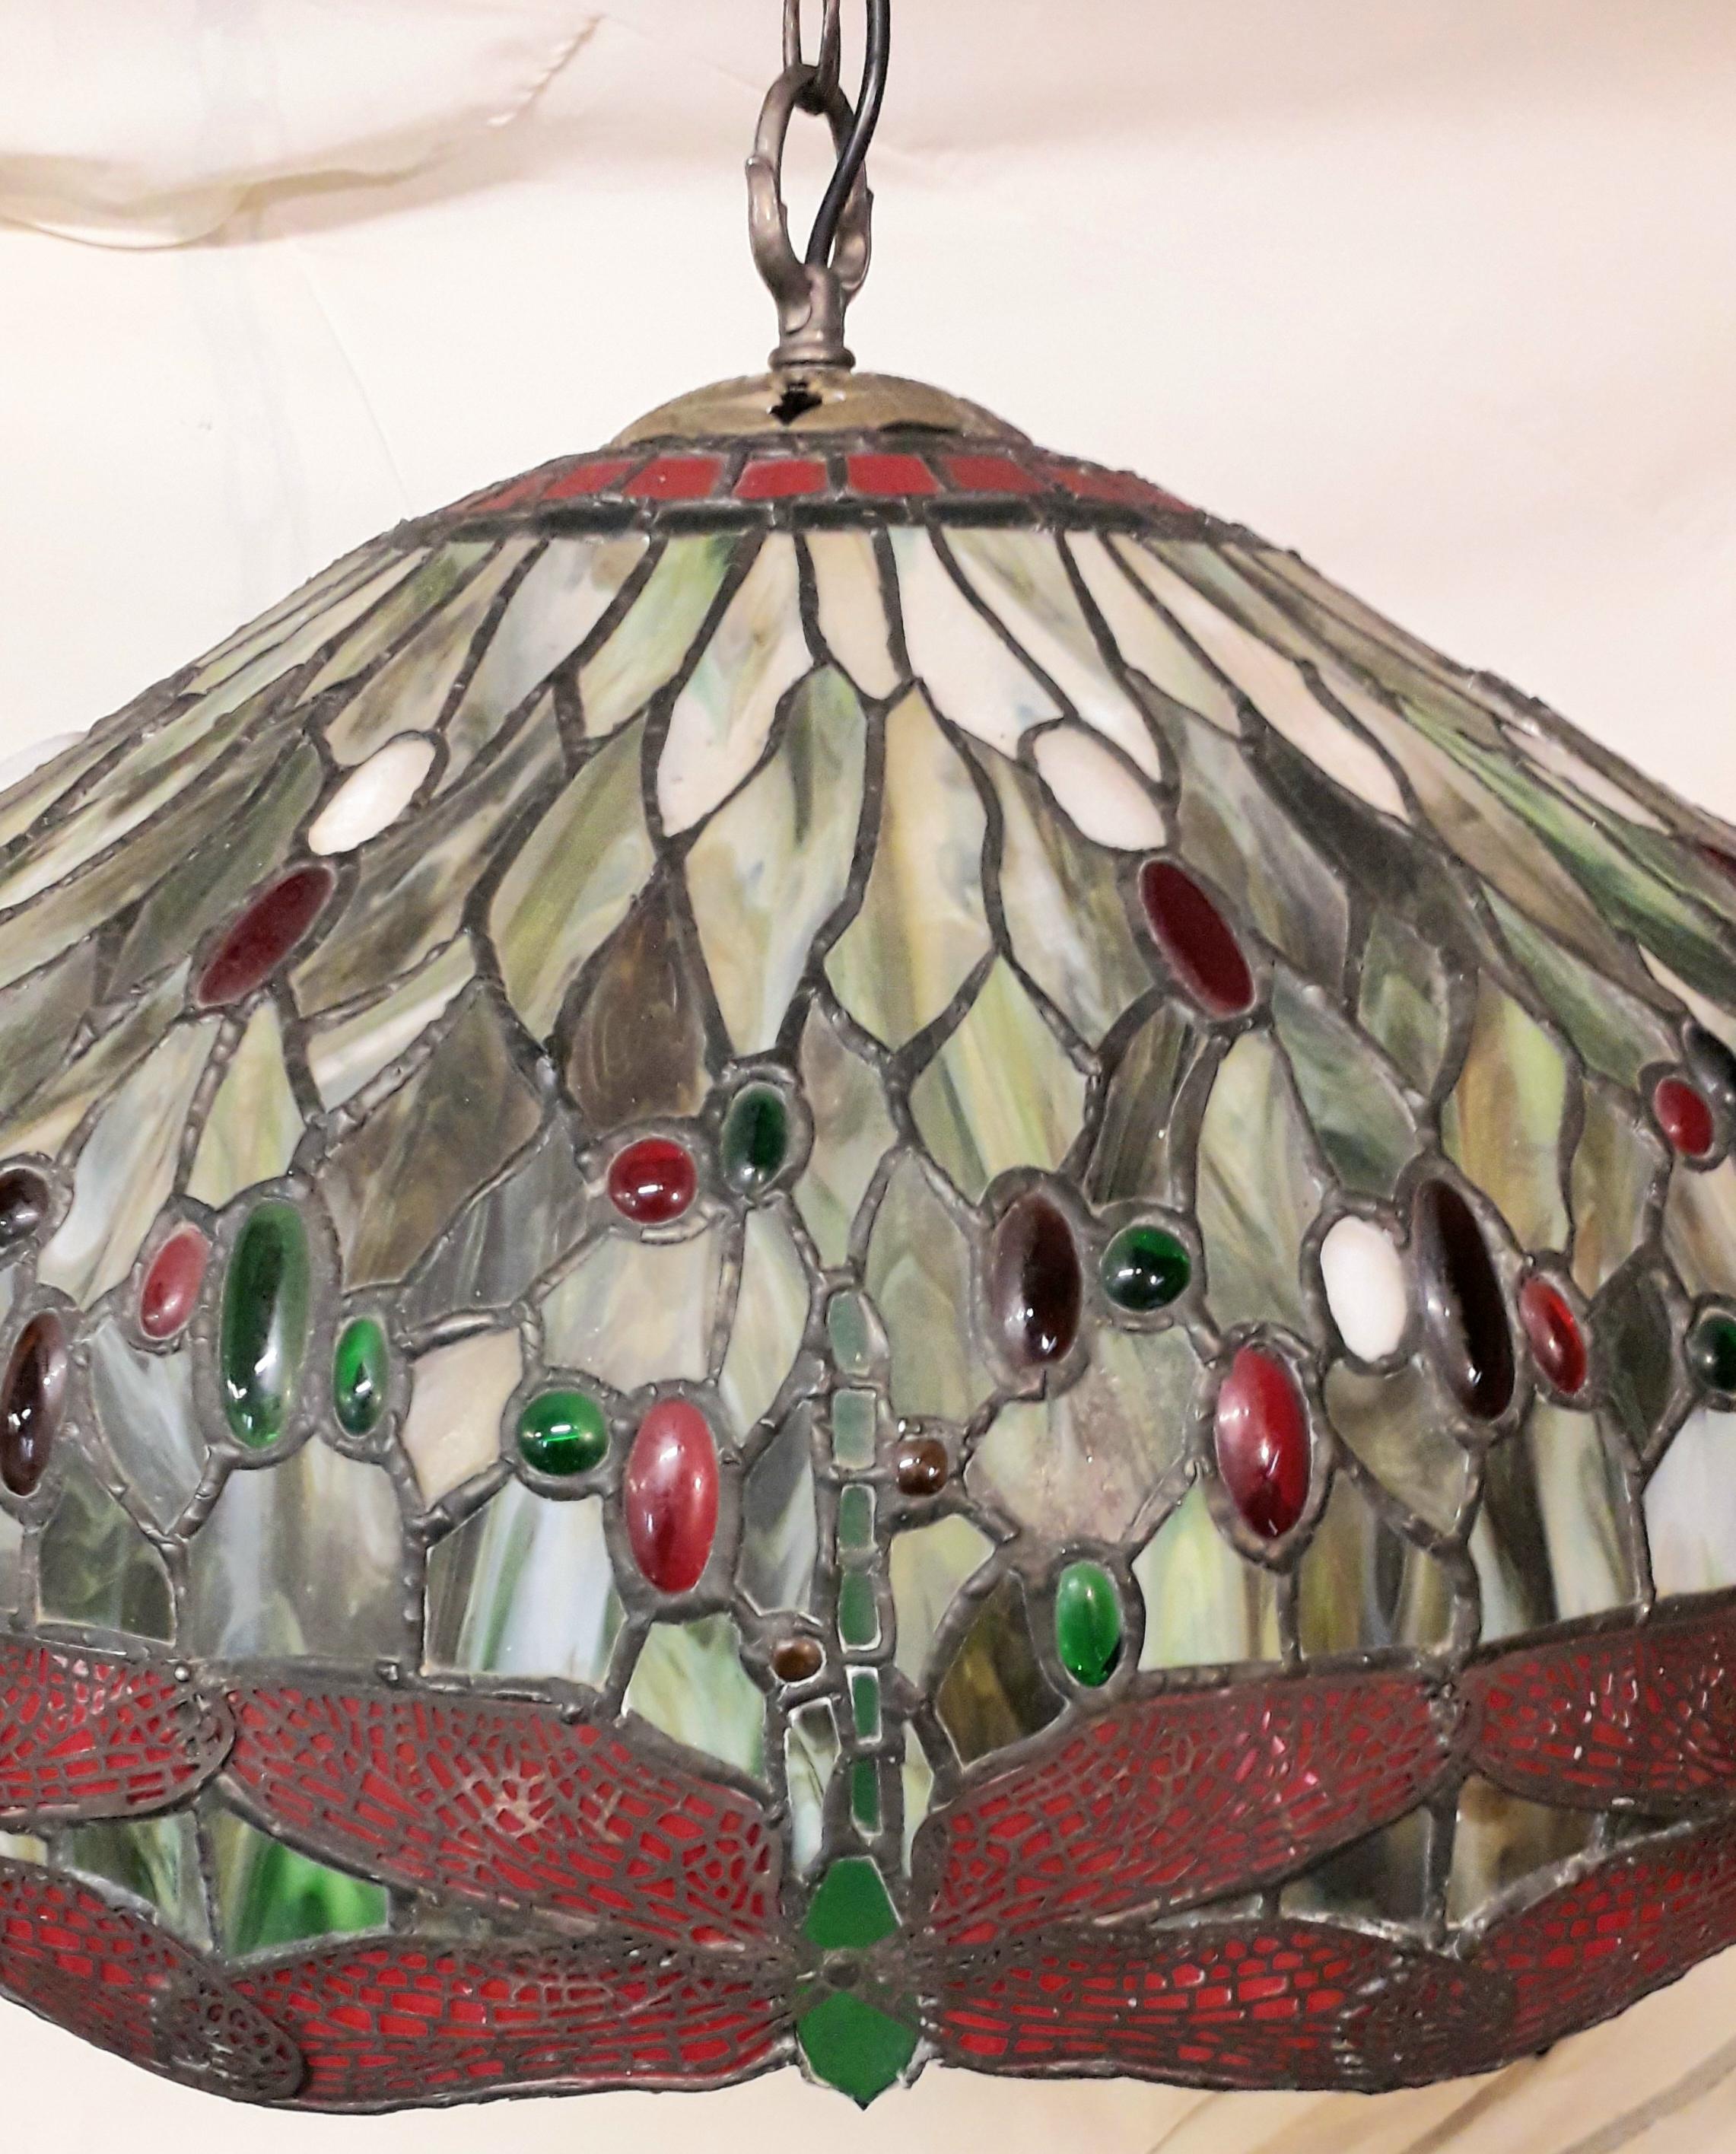 A superb large Tiffany style ceiling light, the lead light red and green cut glass with cabochon relief details, the surround has fine wire work showing inverted butterflies and the piece has excellent patinated lead so is not the normal bright new